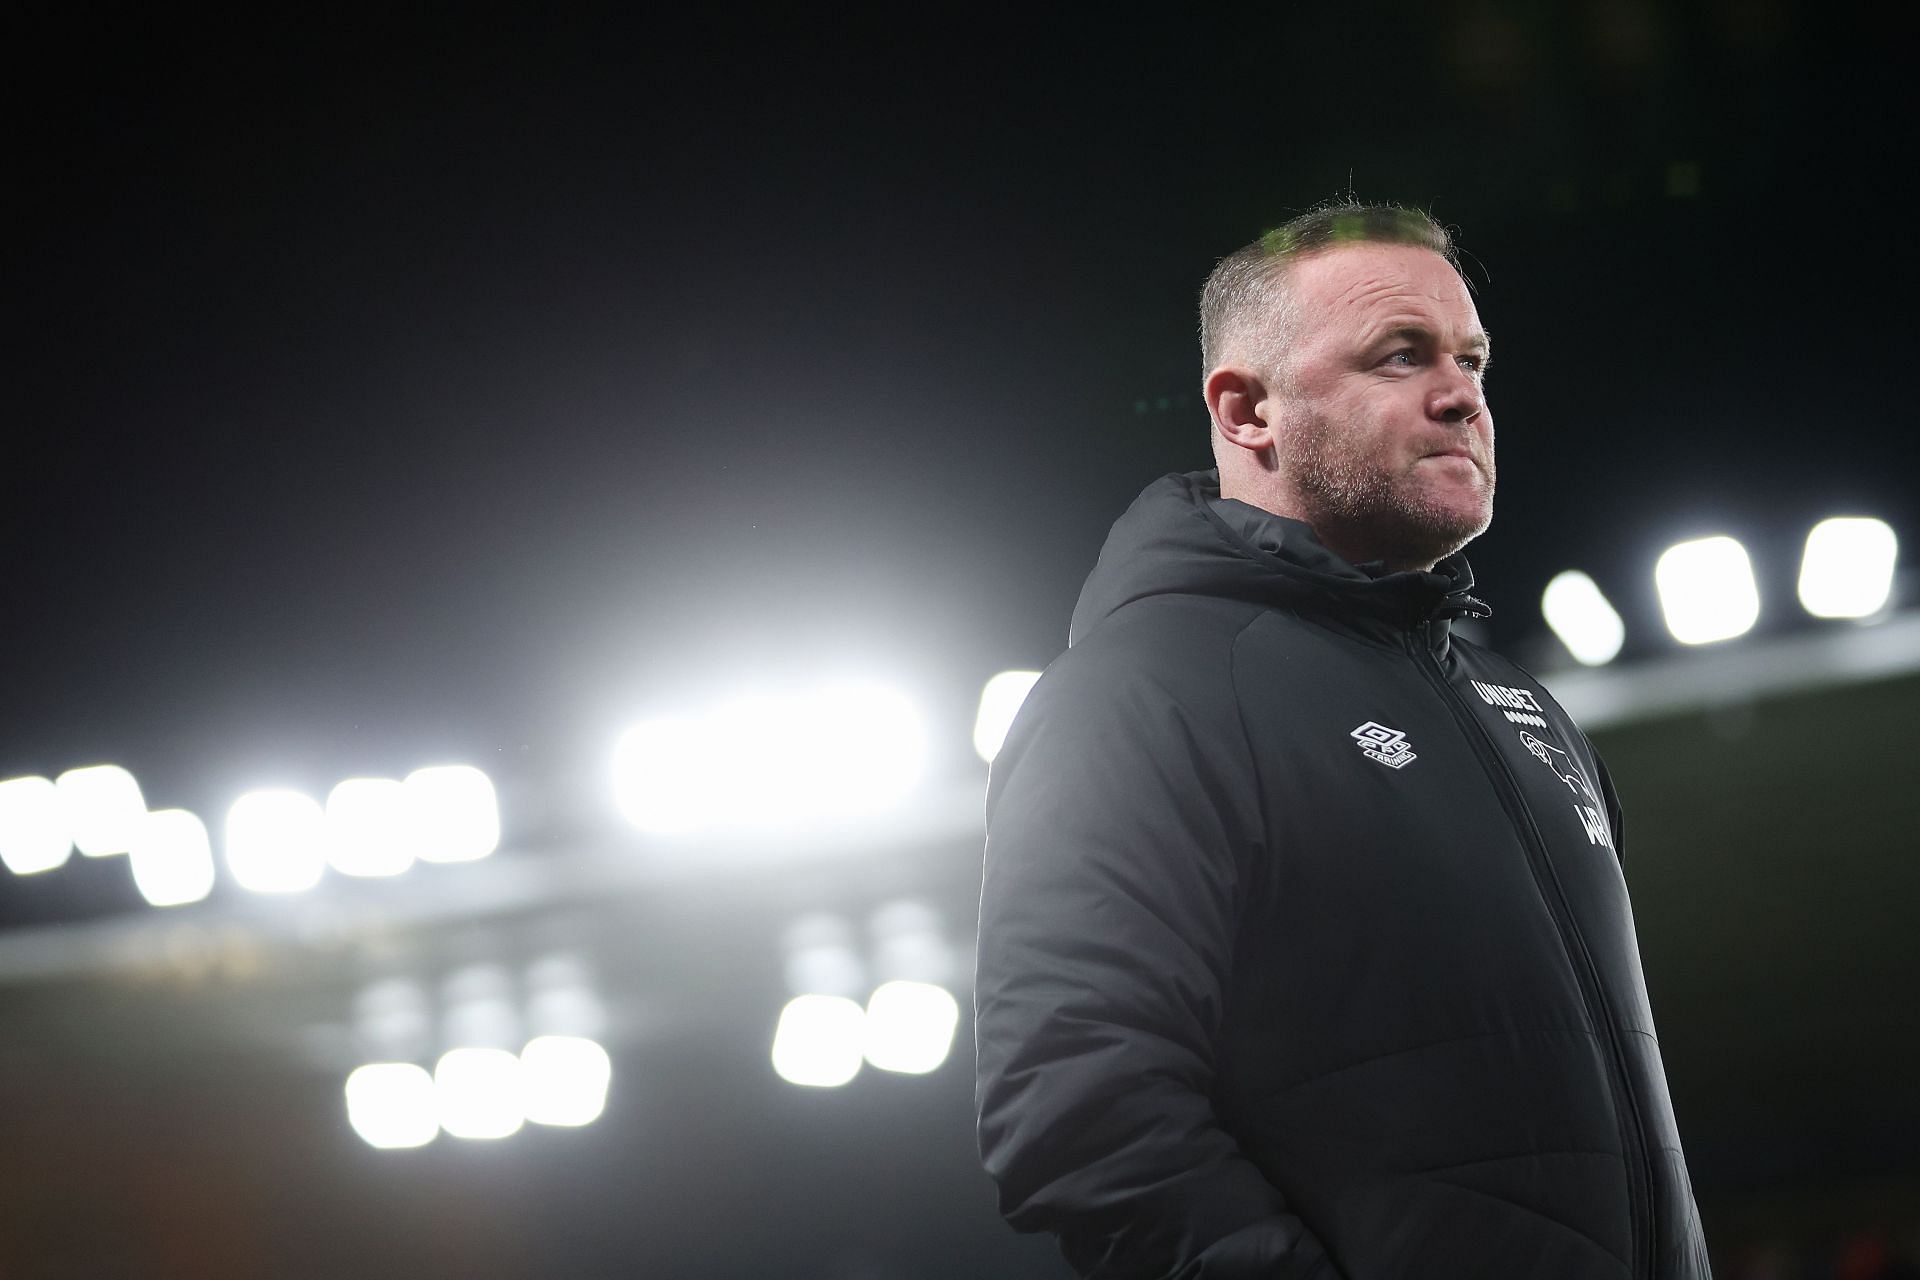 Derby County will face Millwall on Wednesday - Sky Bet Championship